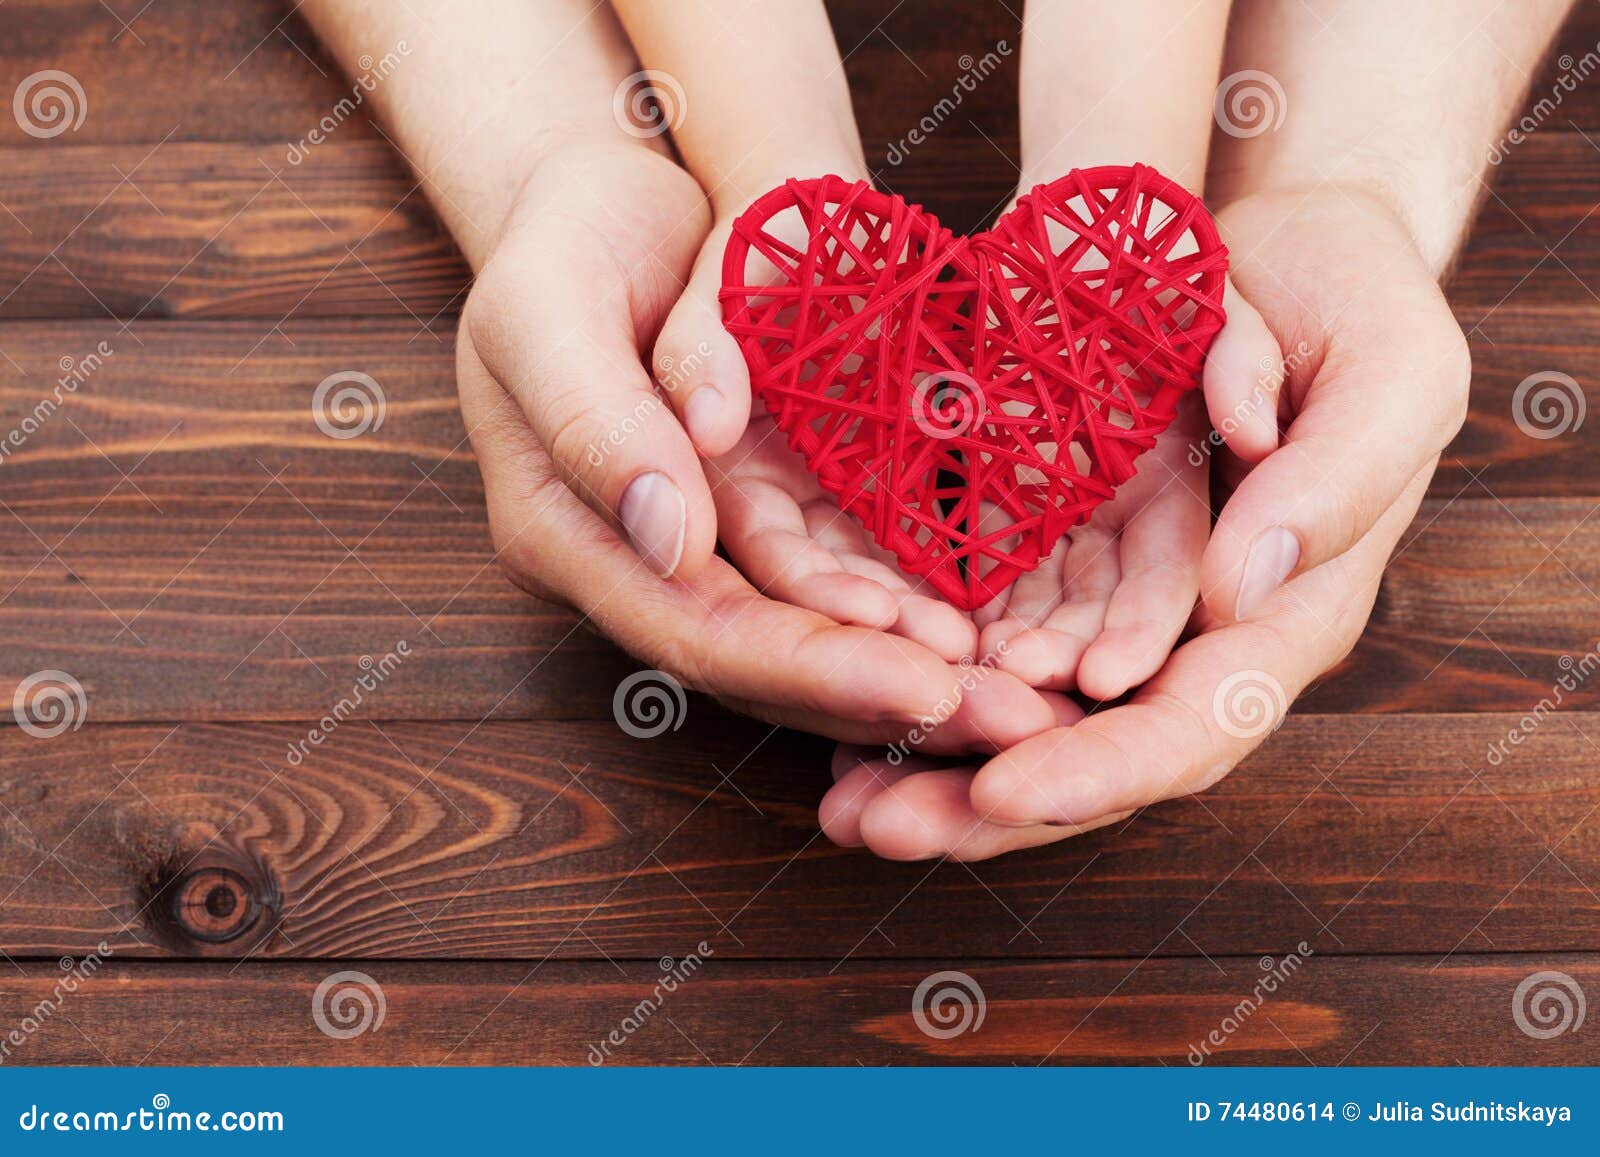 adult and child holding red heart in hands over a wooden table. family relationships, health care, pediatric cardiology concept.